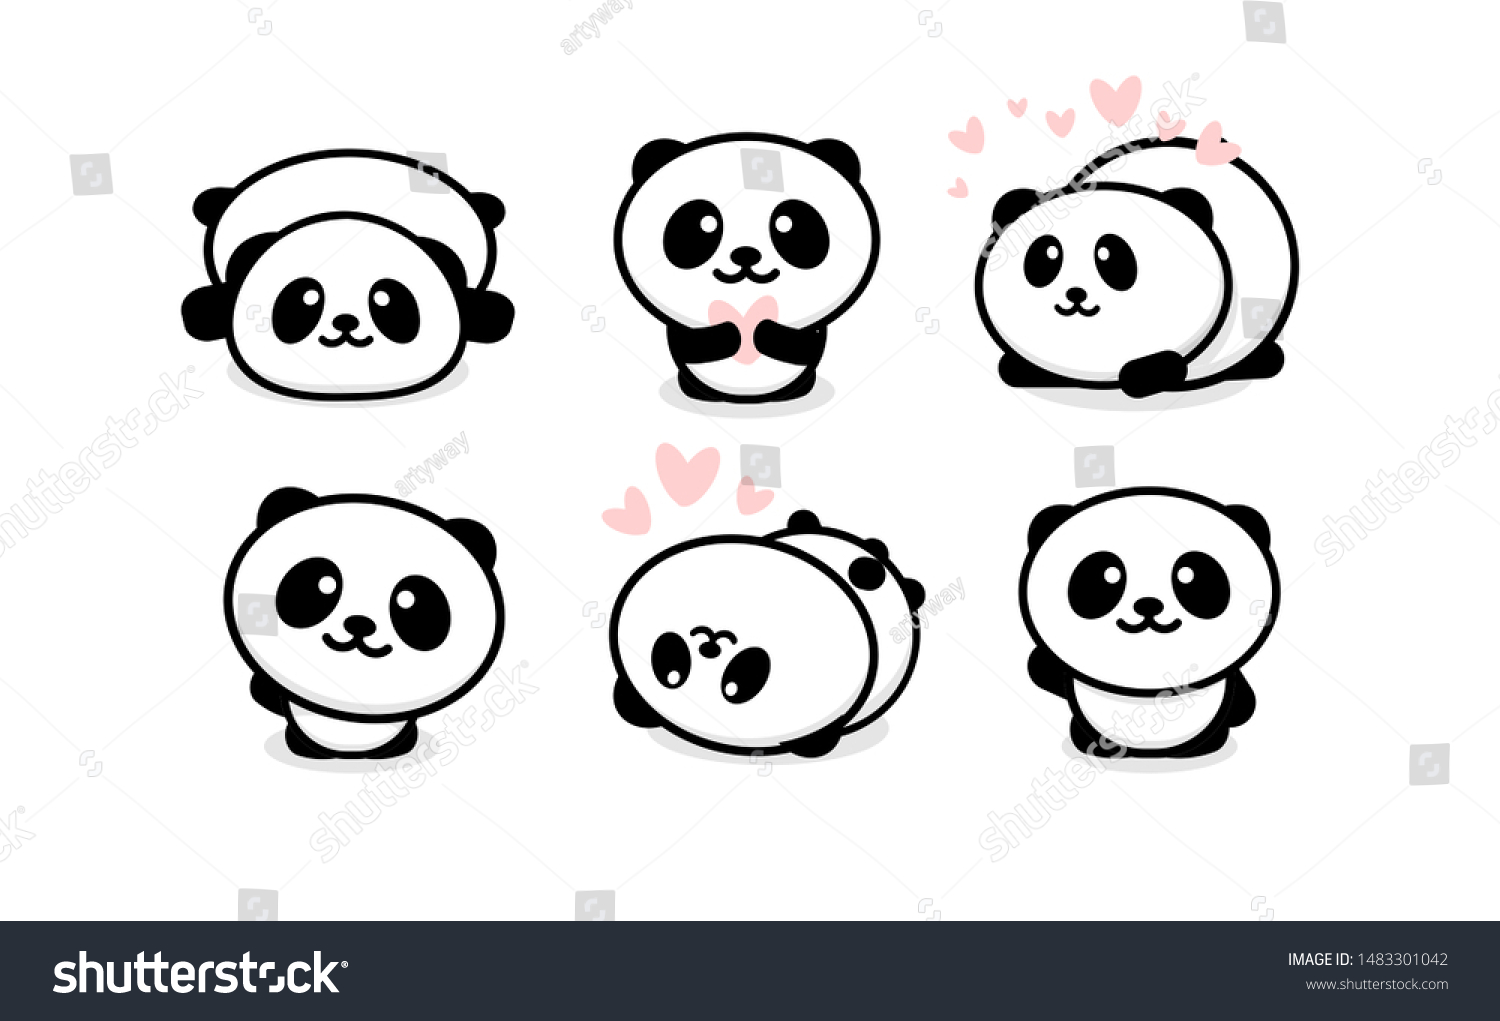 SVG of Friendly and cute pandas set. Chinese bear icons set. Cartoon panda logo template collection. Isolated vector illustration. svg